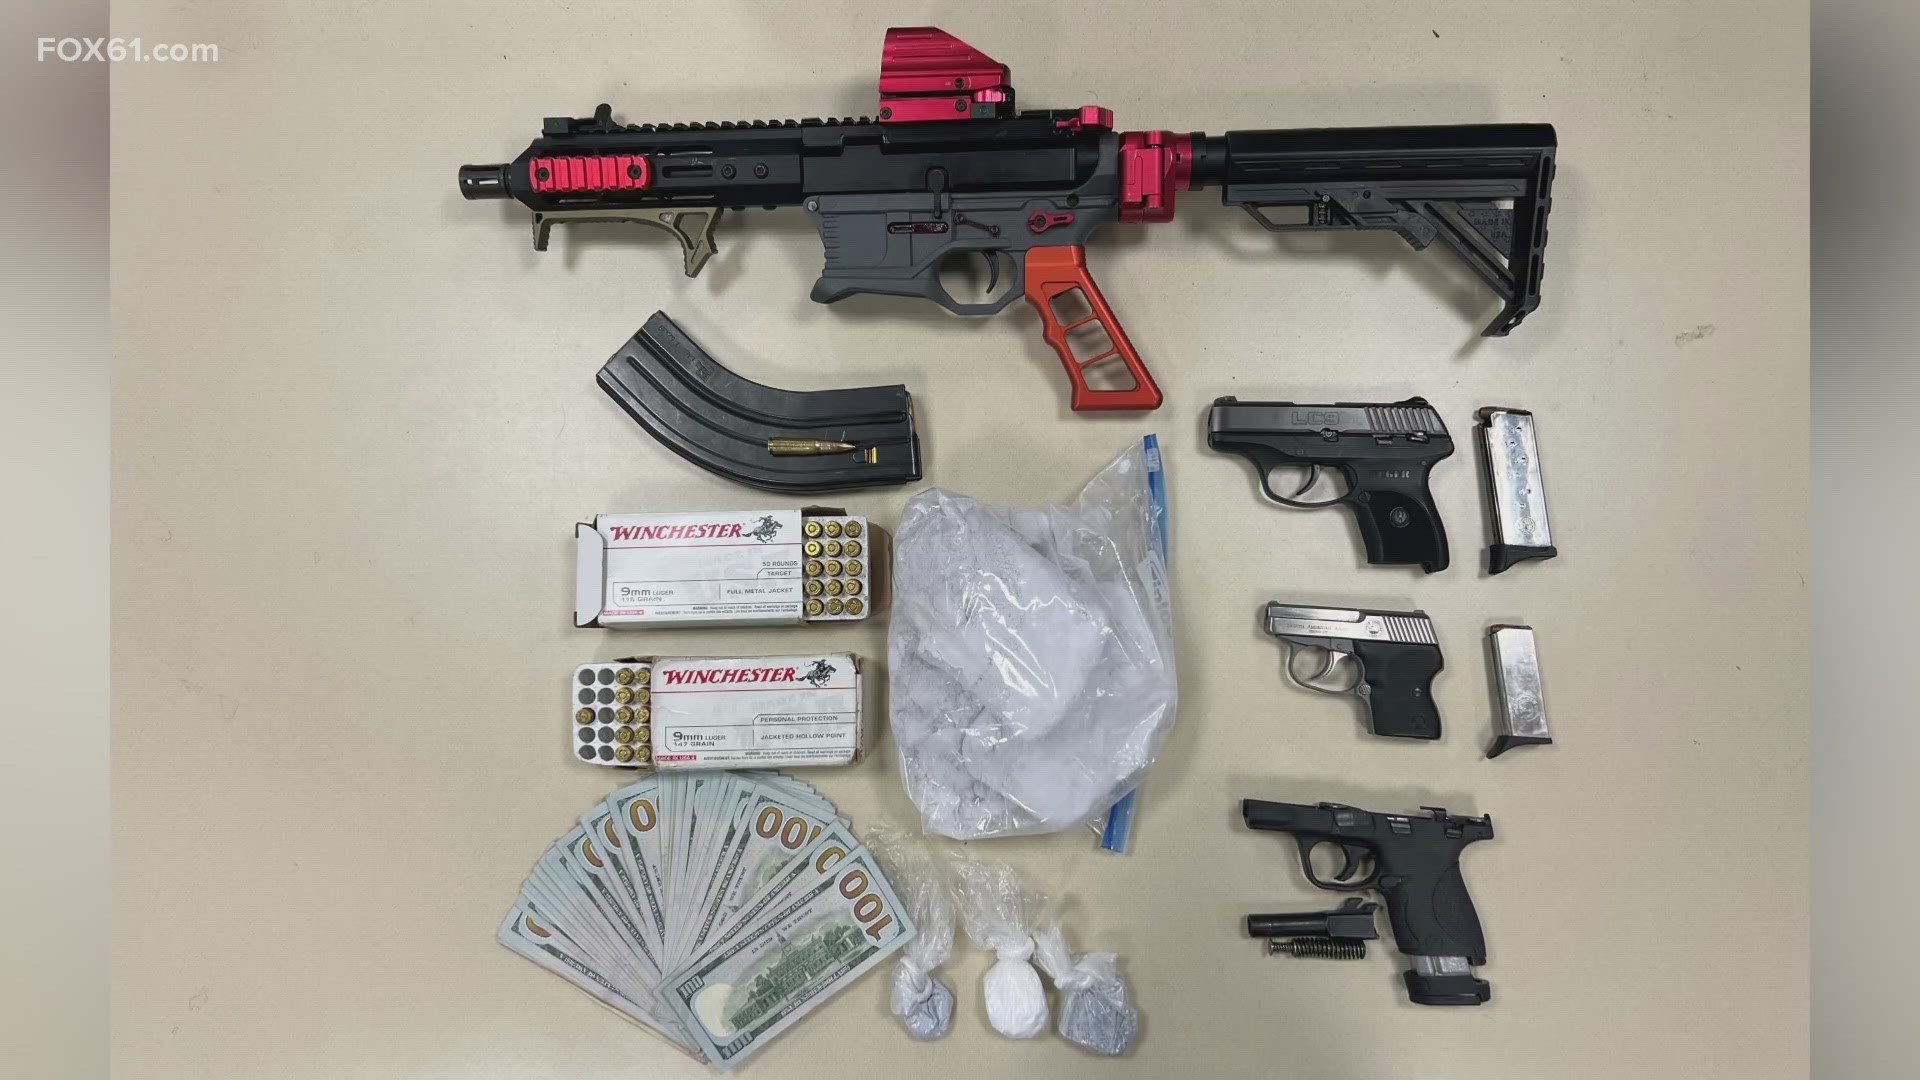 A little over a kilo of fentanyl, 1,200 grams of fentanyl was recovered by police and these hauls are why Sen. Chris Murphy wants lawmakers to address the crisis.